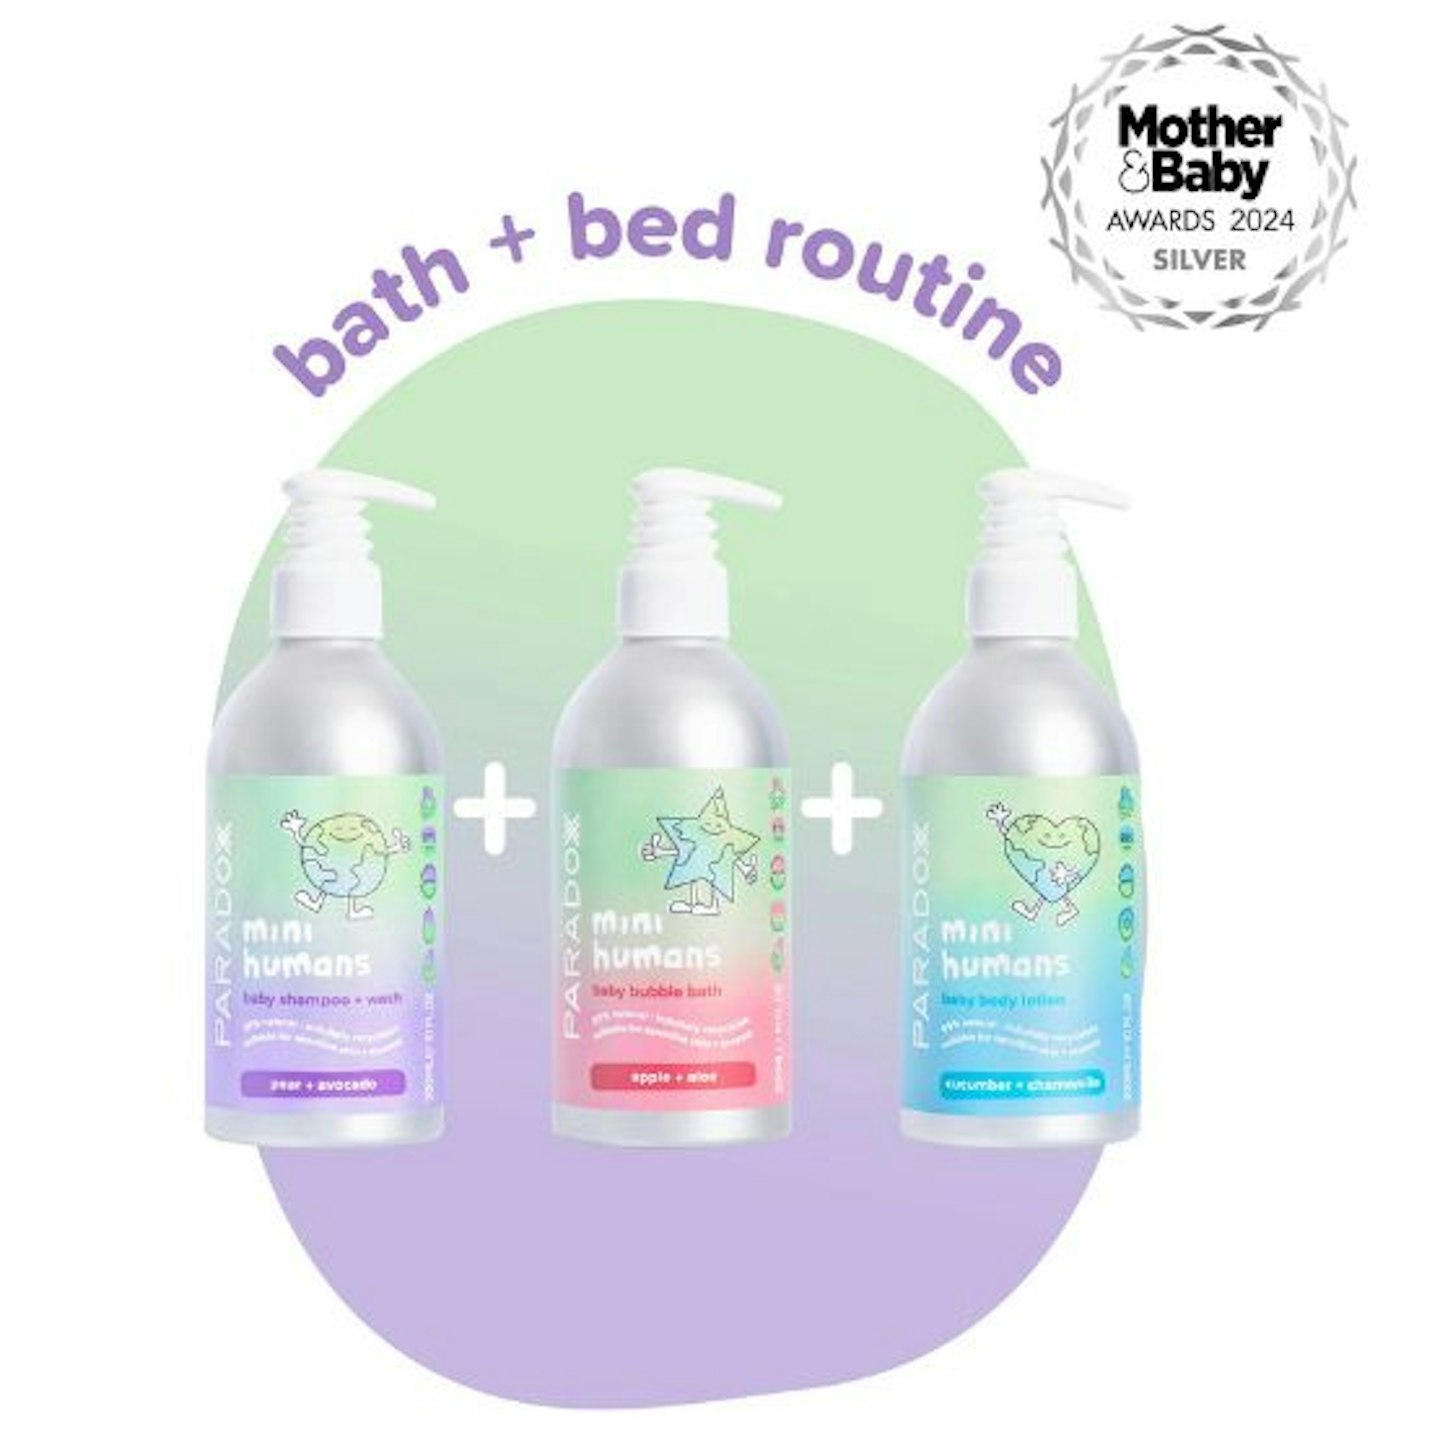 Mini Humans Baby Personal Care Collection